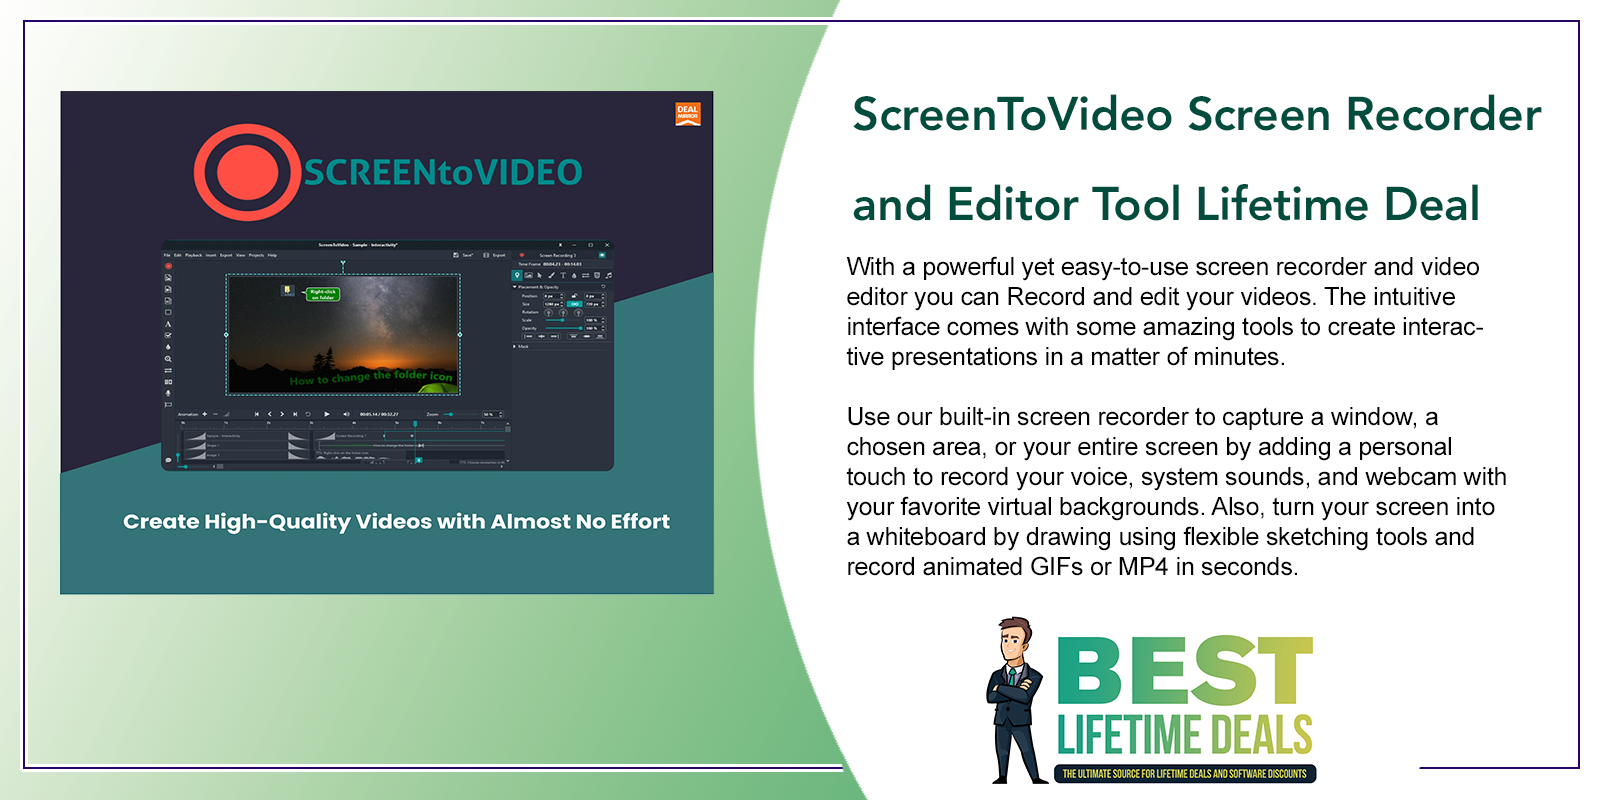 ScreenToVideo Screen Recorder and Editor Tool Lifetime Deal Featured Image